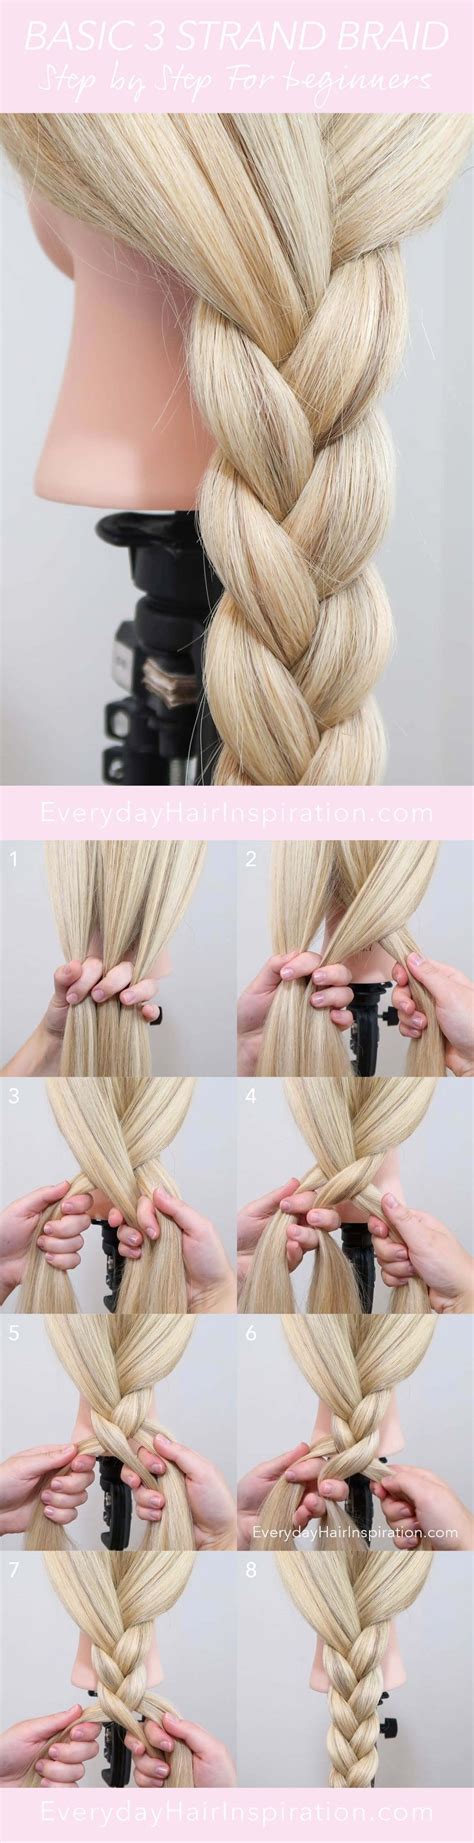 how to dutch braid with extensions everyday hair inspiration